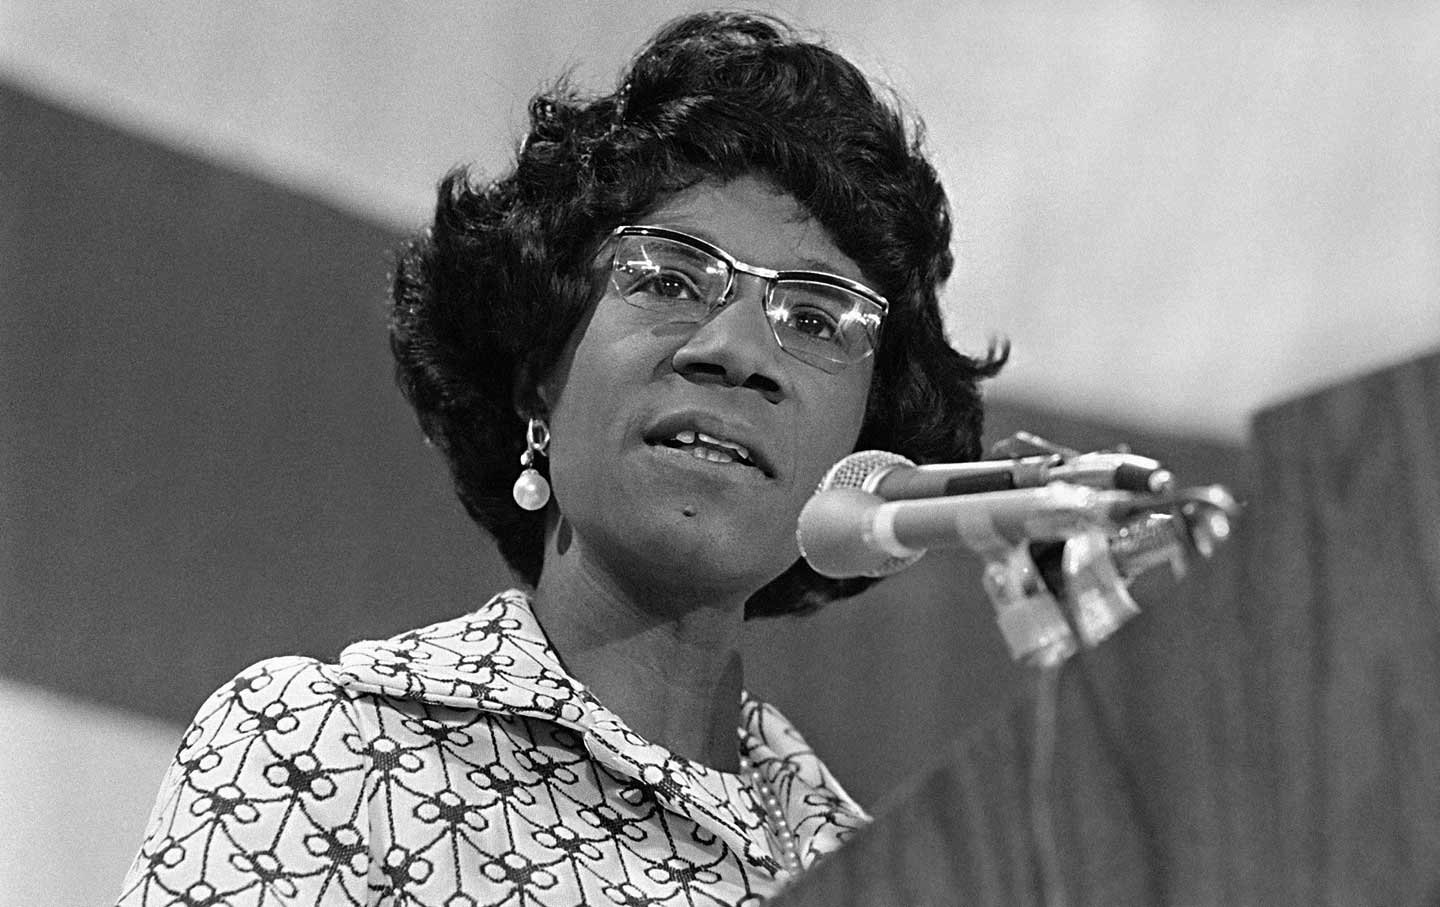 This black-and-white photo of Shirley Chisholm shows her standing on a dais while speaking into a microphone.